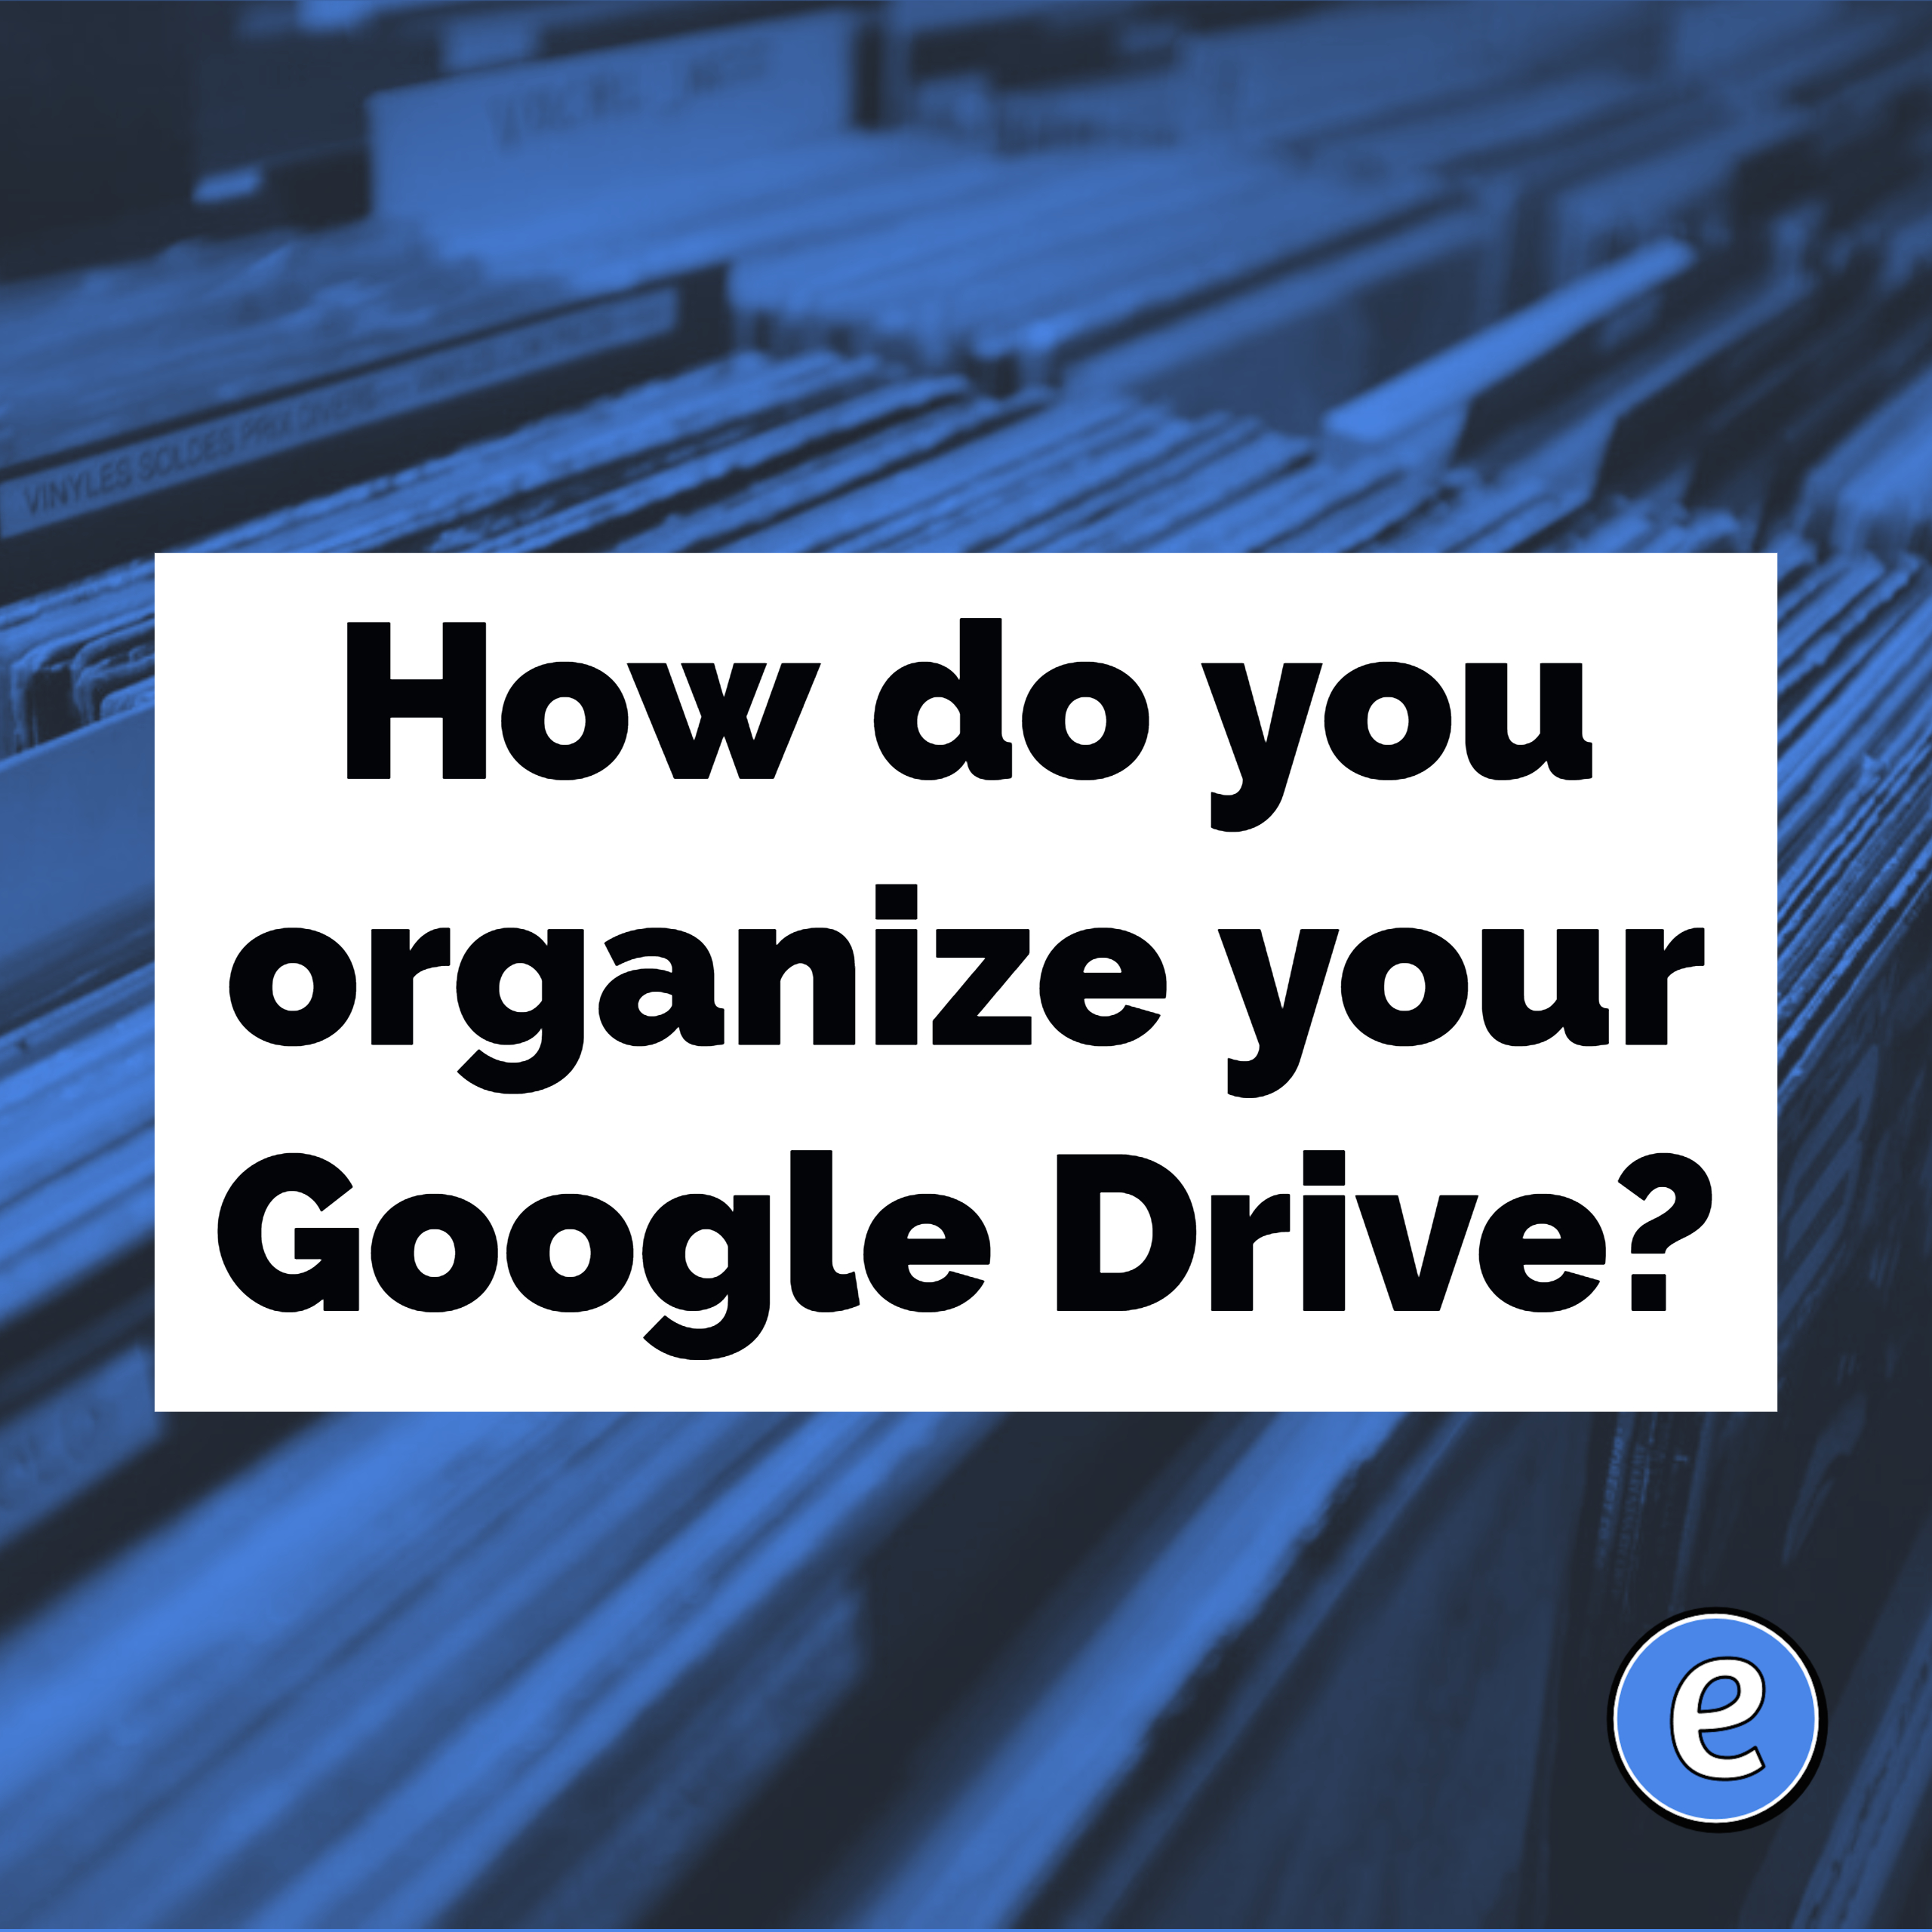 How do you organize your Google Drive?